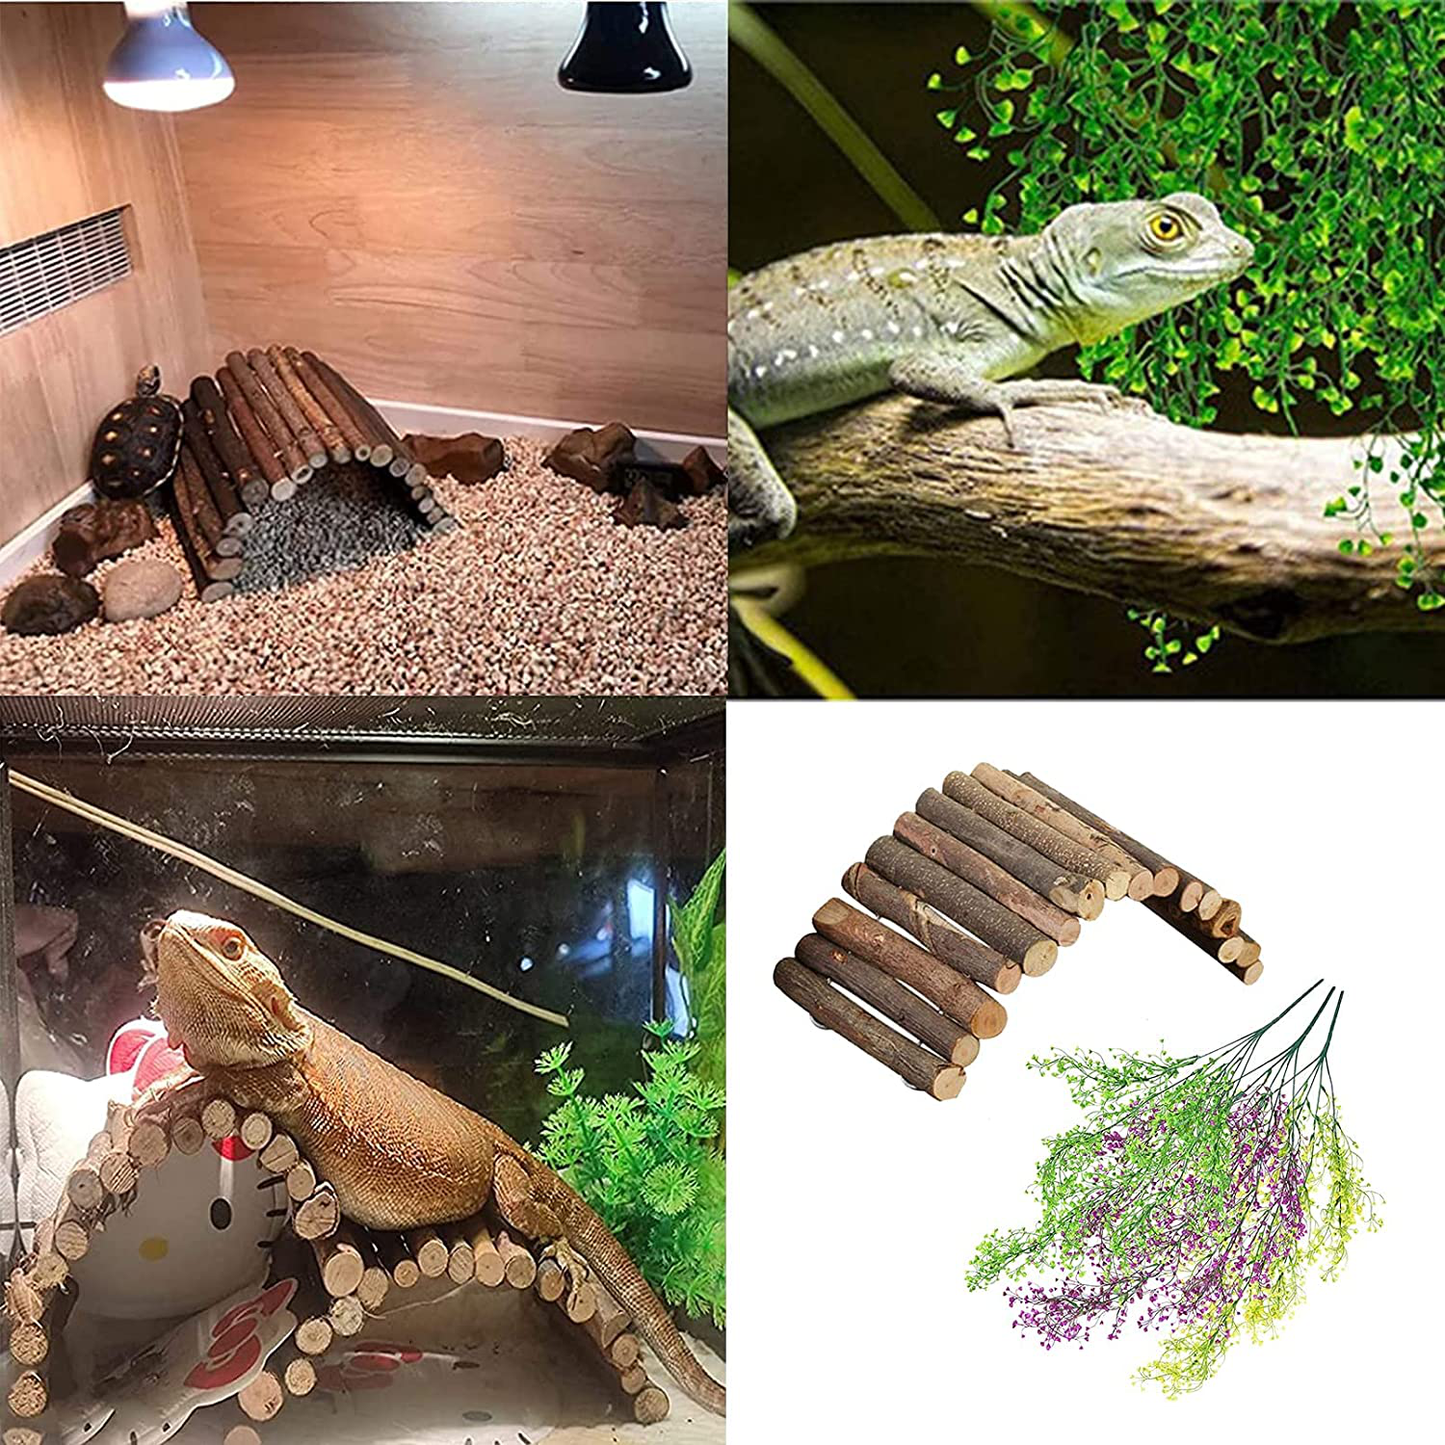 PINVNBY Reptile Soft Bendable Wooden Ladder Bridge Hideout Bearded Dragon Artificial Plastic Vines Plant with Suction Cup Cave Reptile Habitat Accessory for Lizard Bearded Dragon Gecko Chameleon Snake